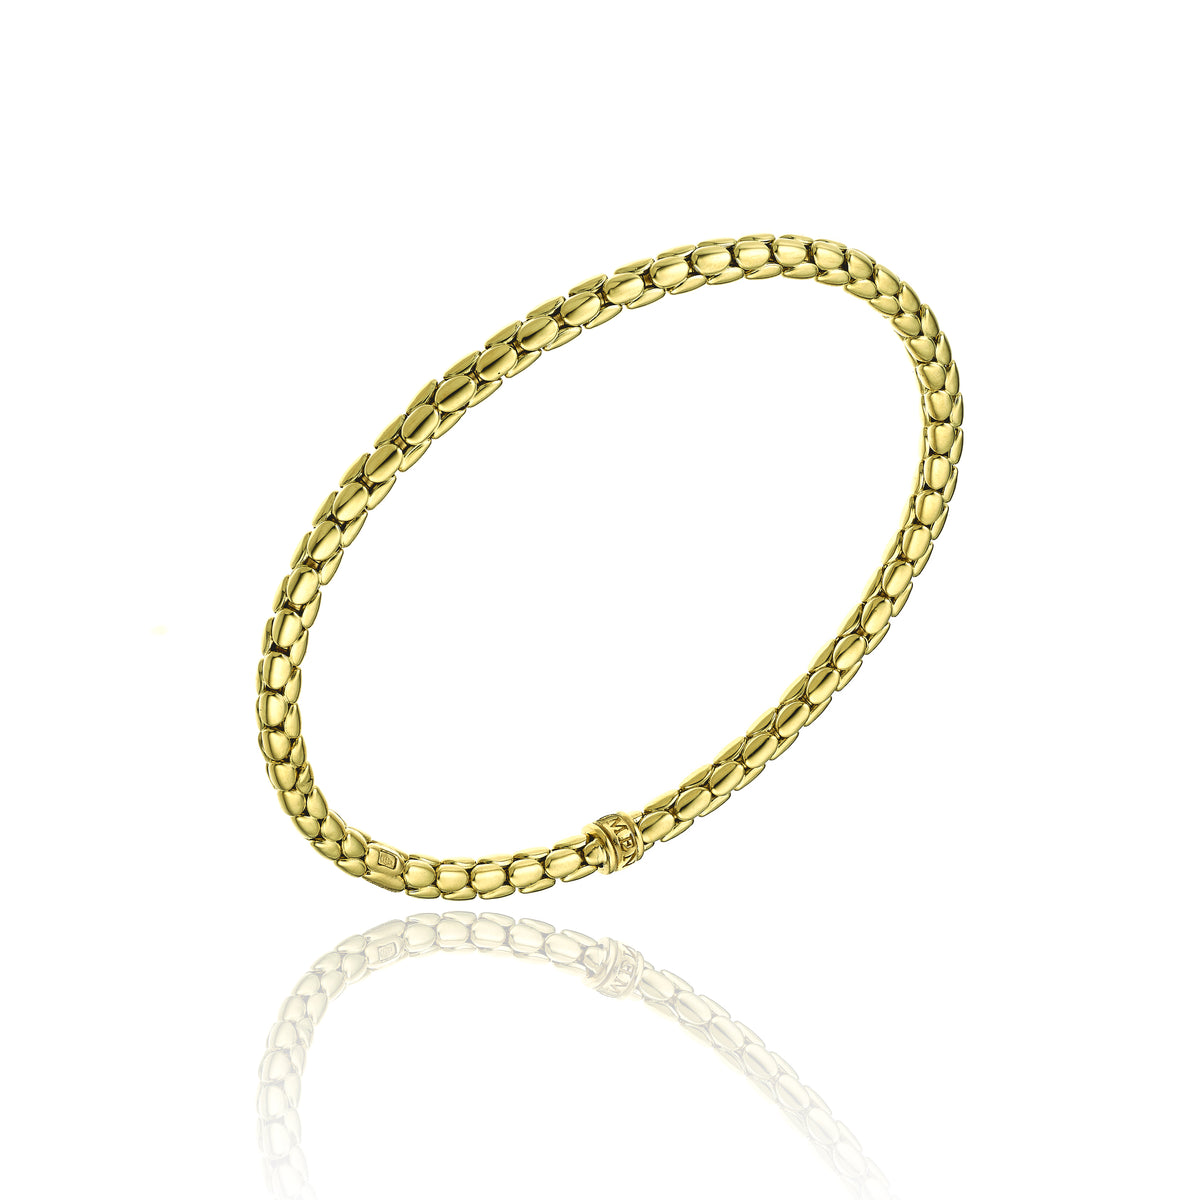 Chimento Stretch Spring Bracelet (Small) in 18k Yellow Gold - Orsini Jewellers